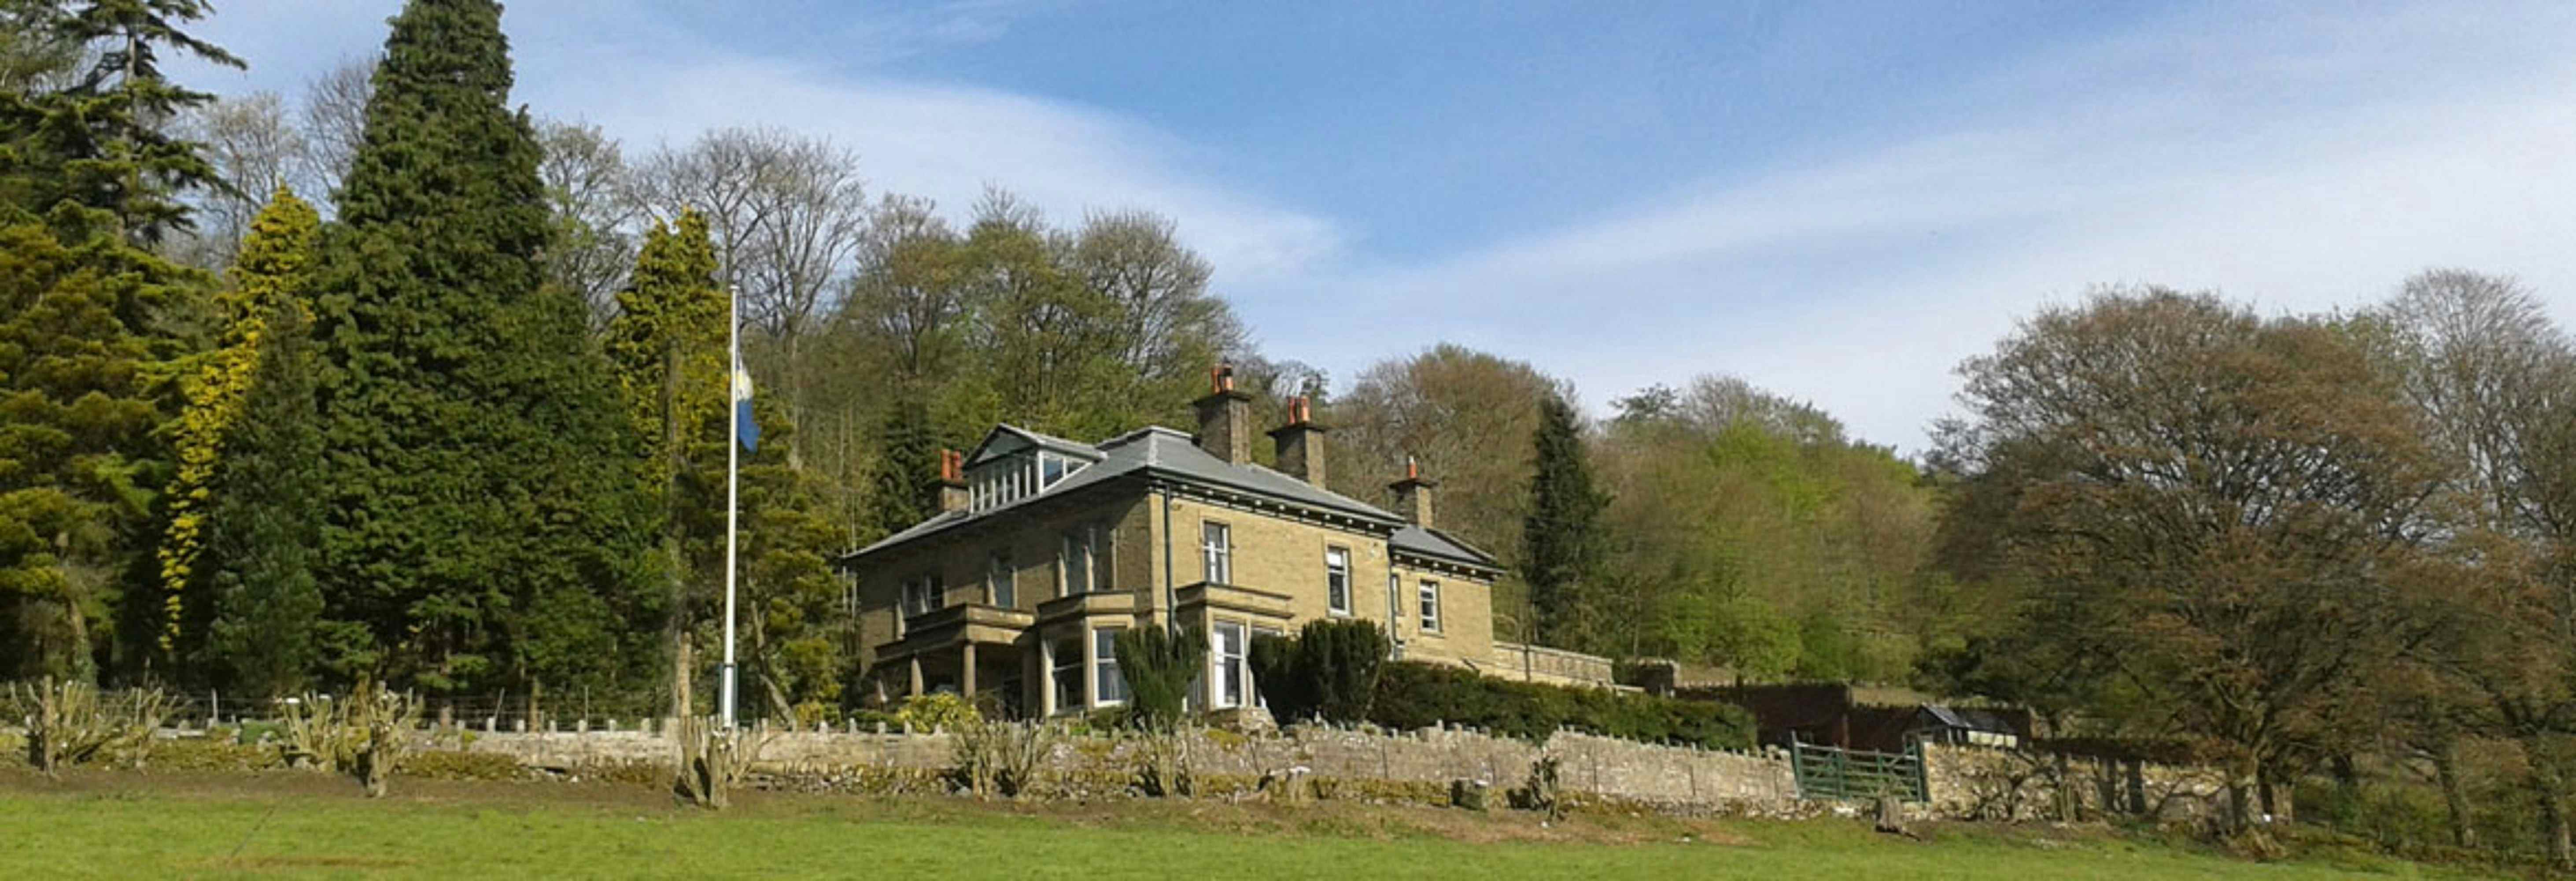 Country House, Woodlands